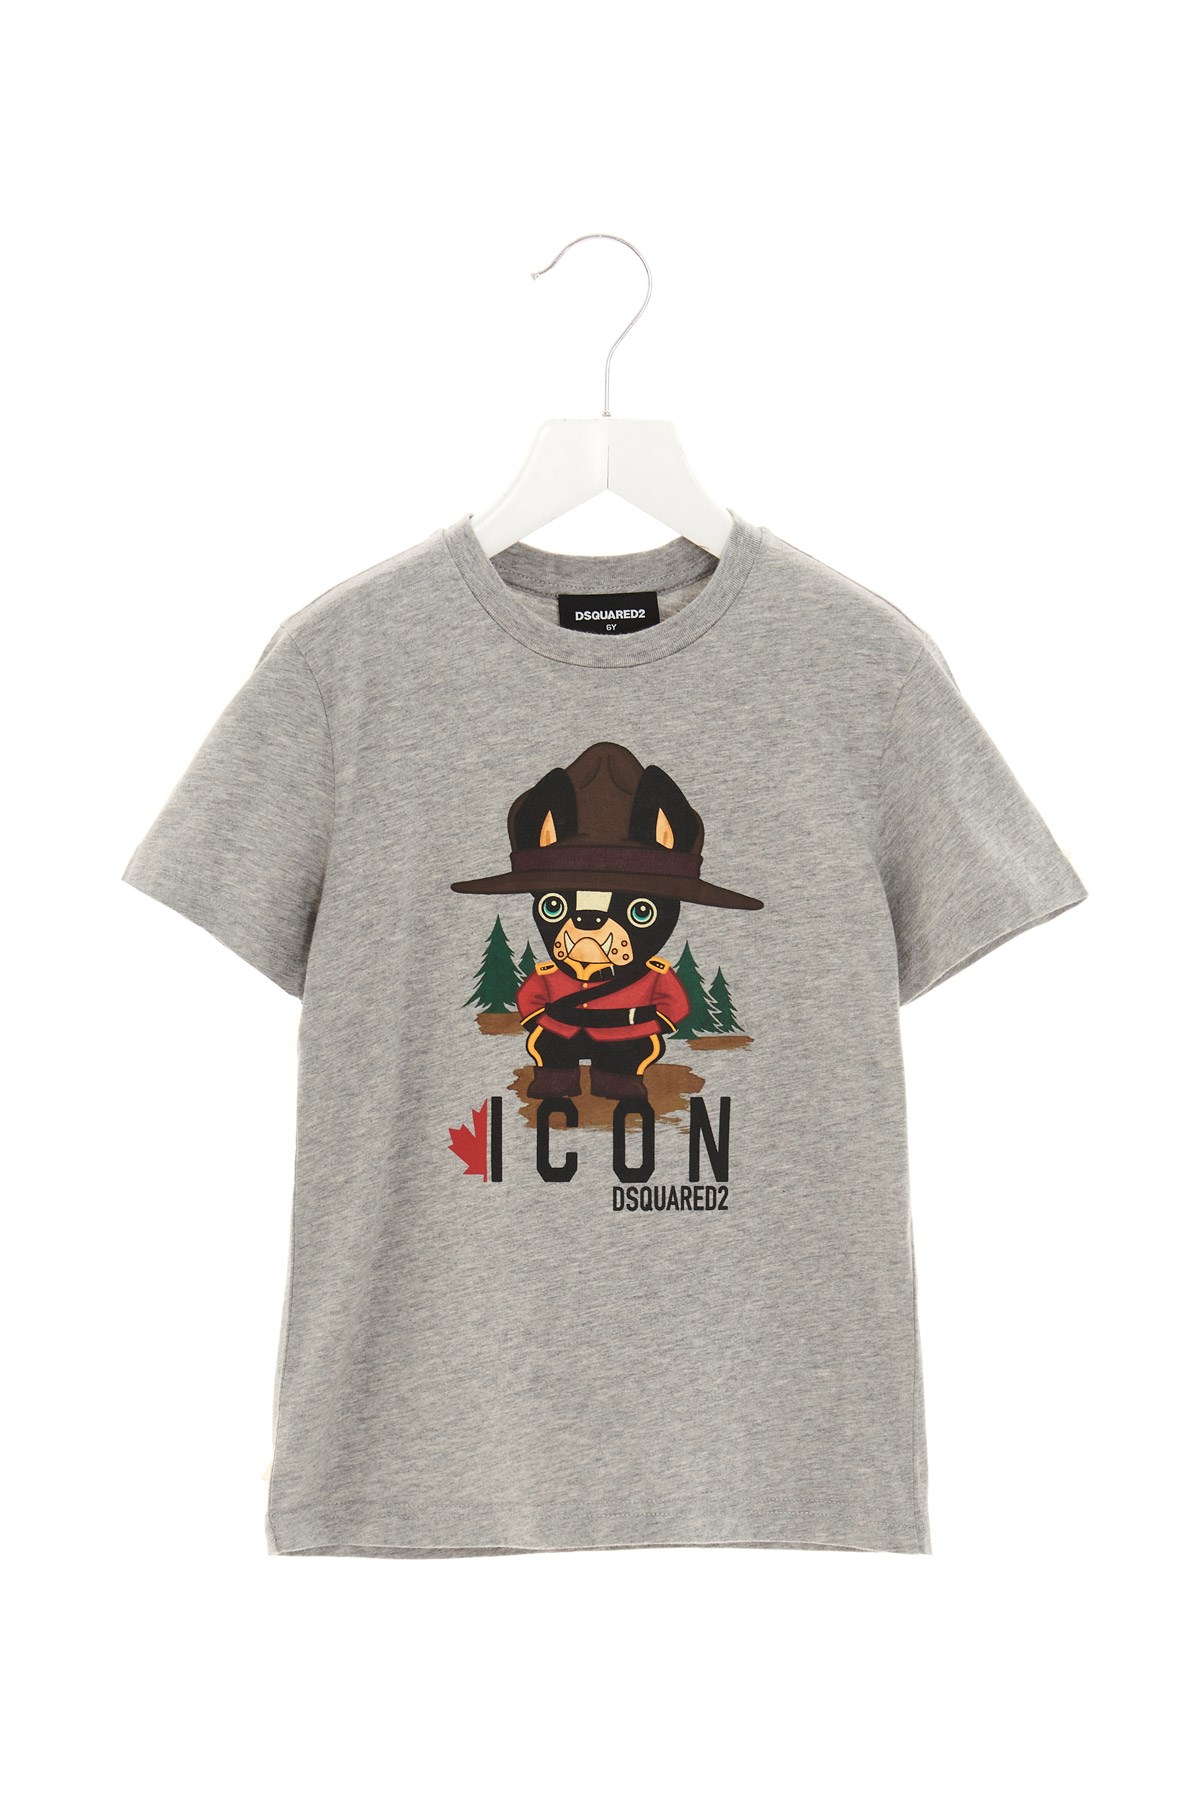 DSQUARED2 'Icon’ T-Shirt